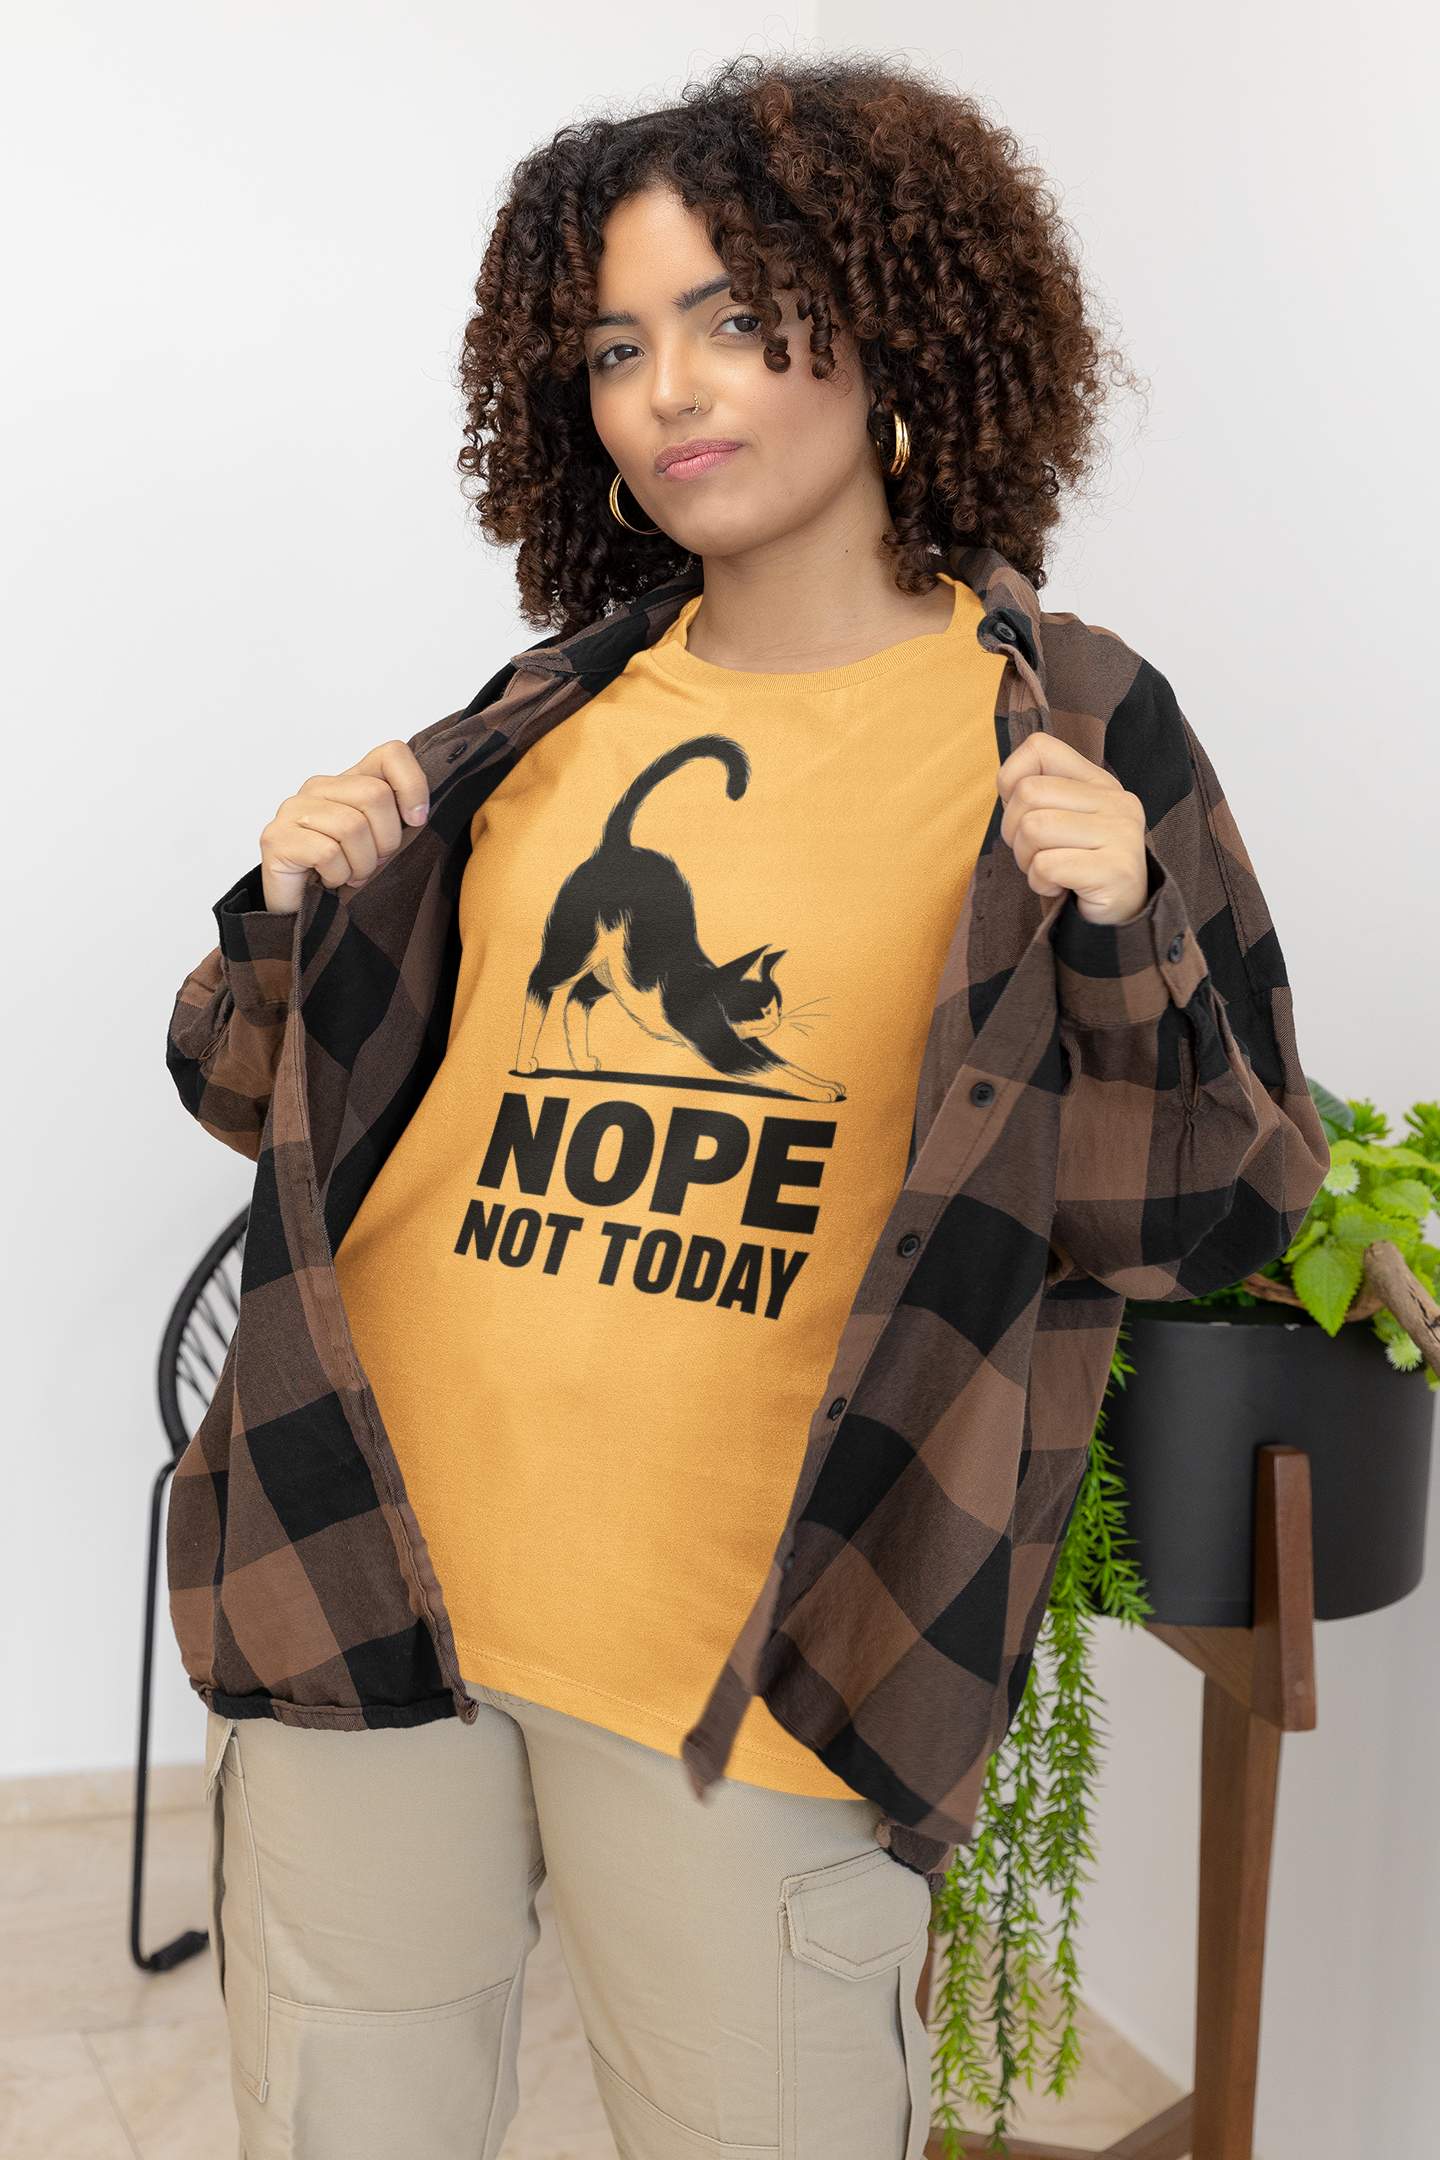 Nope, Not Today Cat - Anime-Style Attitude Tee